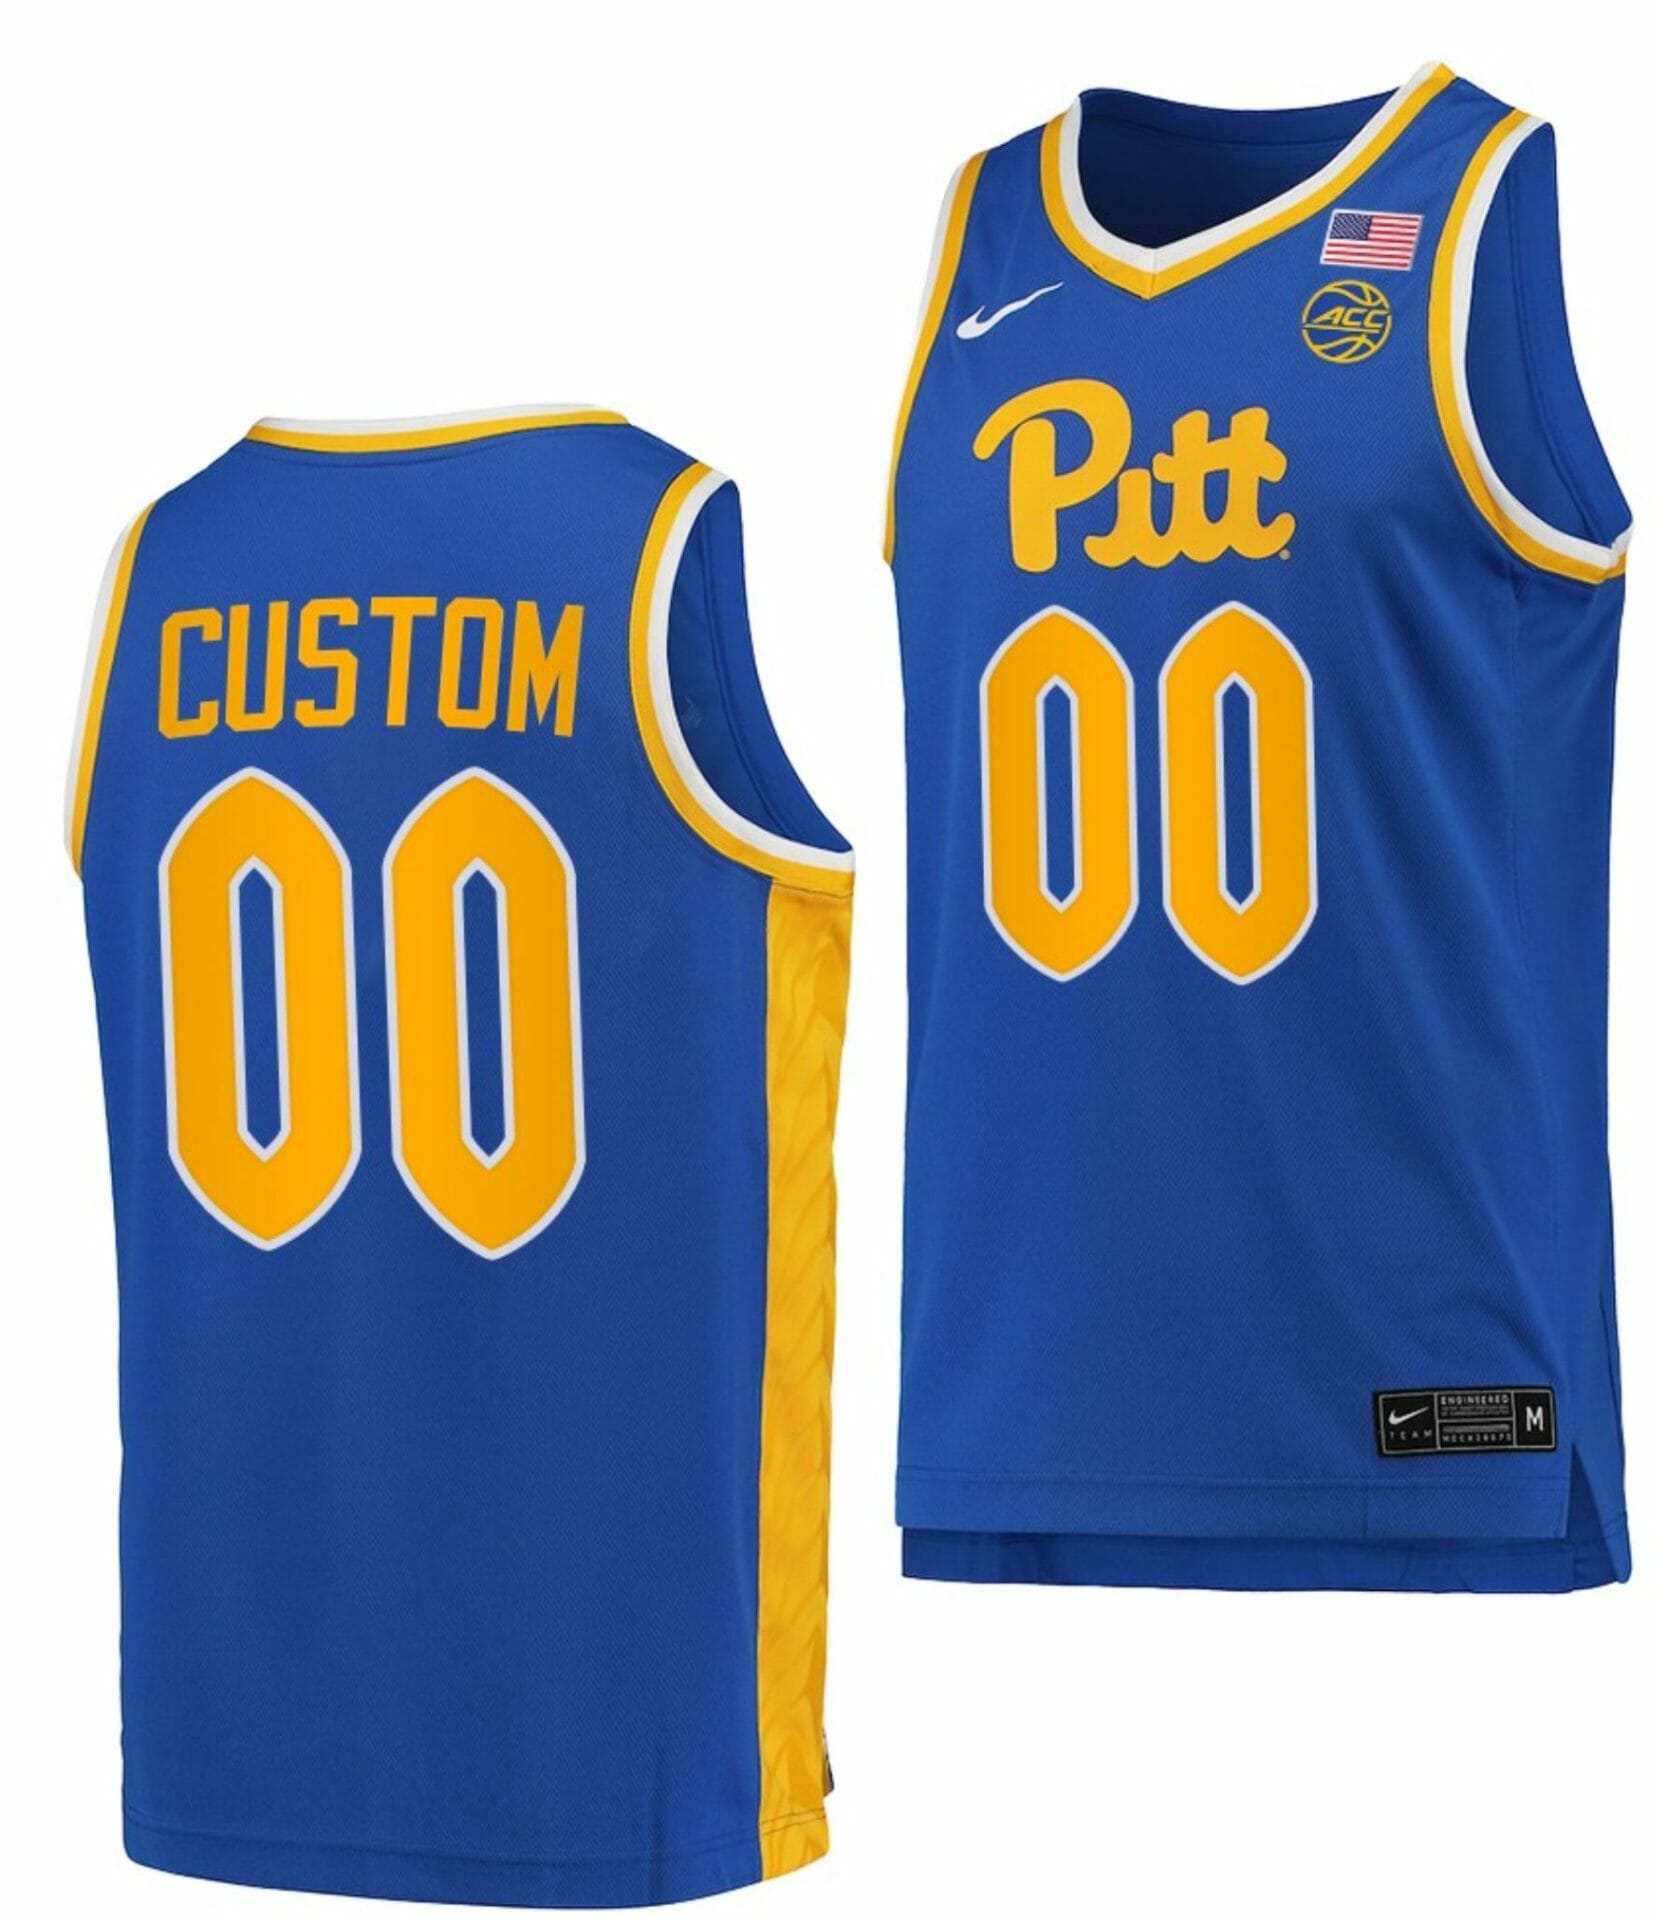 Custom College Basketball Jerseys Pitt Panthers Jersey Name and Number Replica Royal